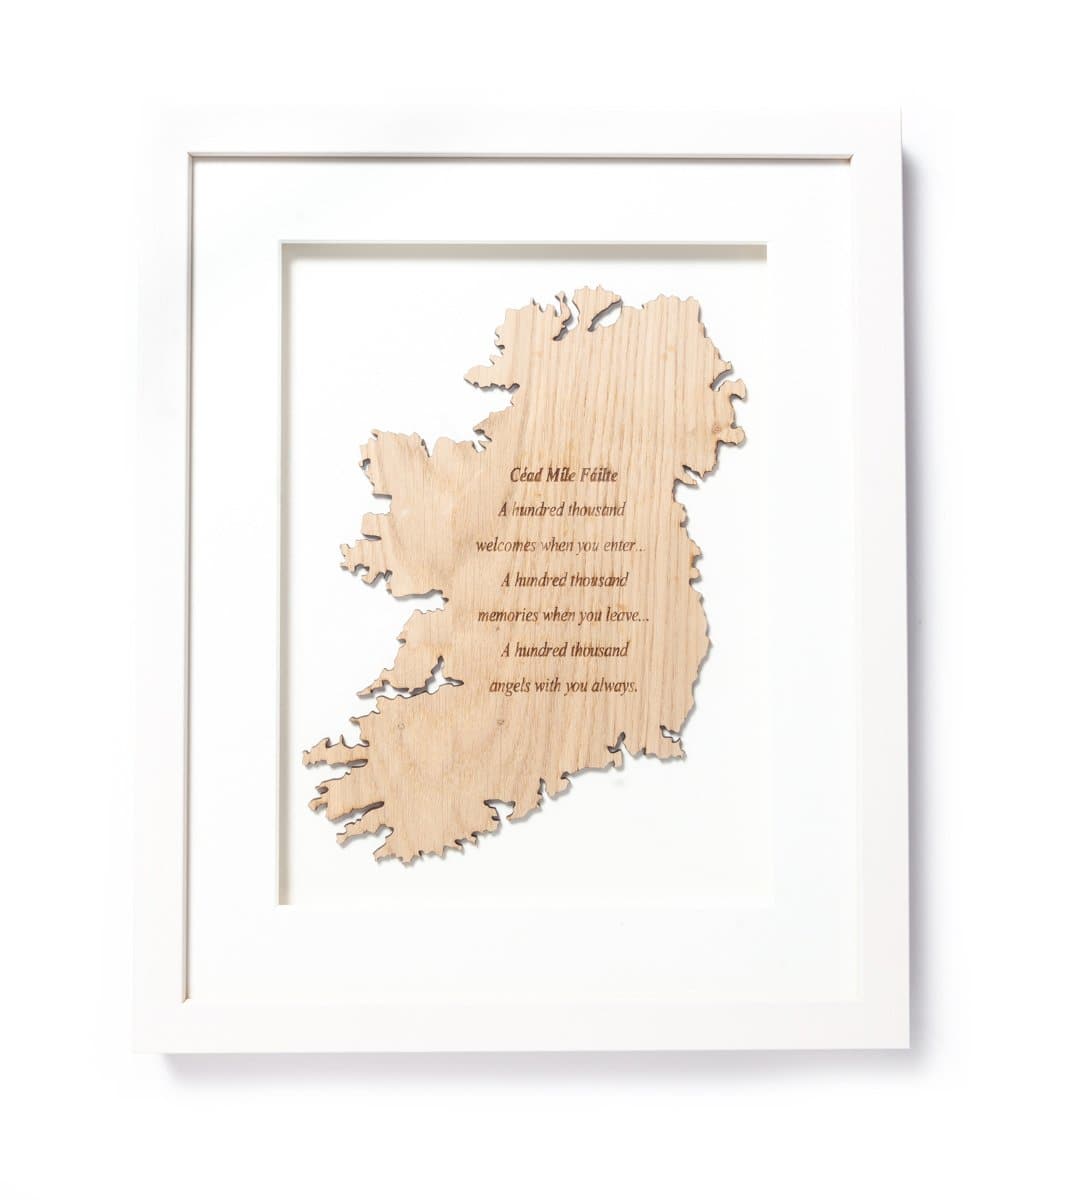 Cead Mile Failte Framed Wall Decor Made in Ireland Traditional Irish Welcome Irish Greeting Unique Gift Crafted by Our Maker-Partner in Co. Meath